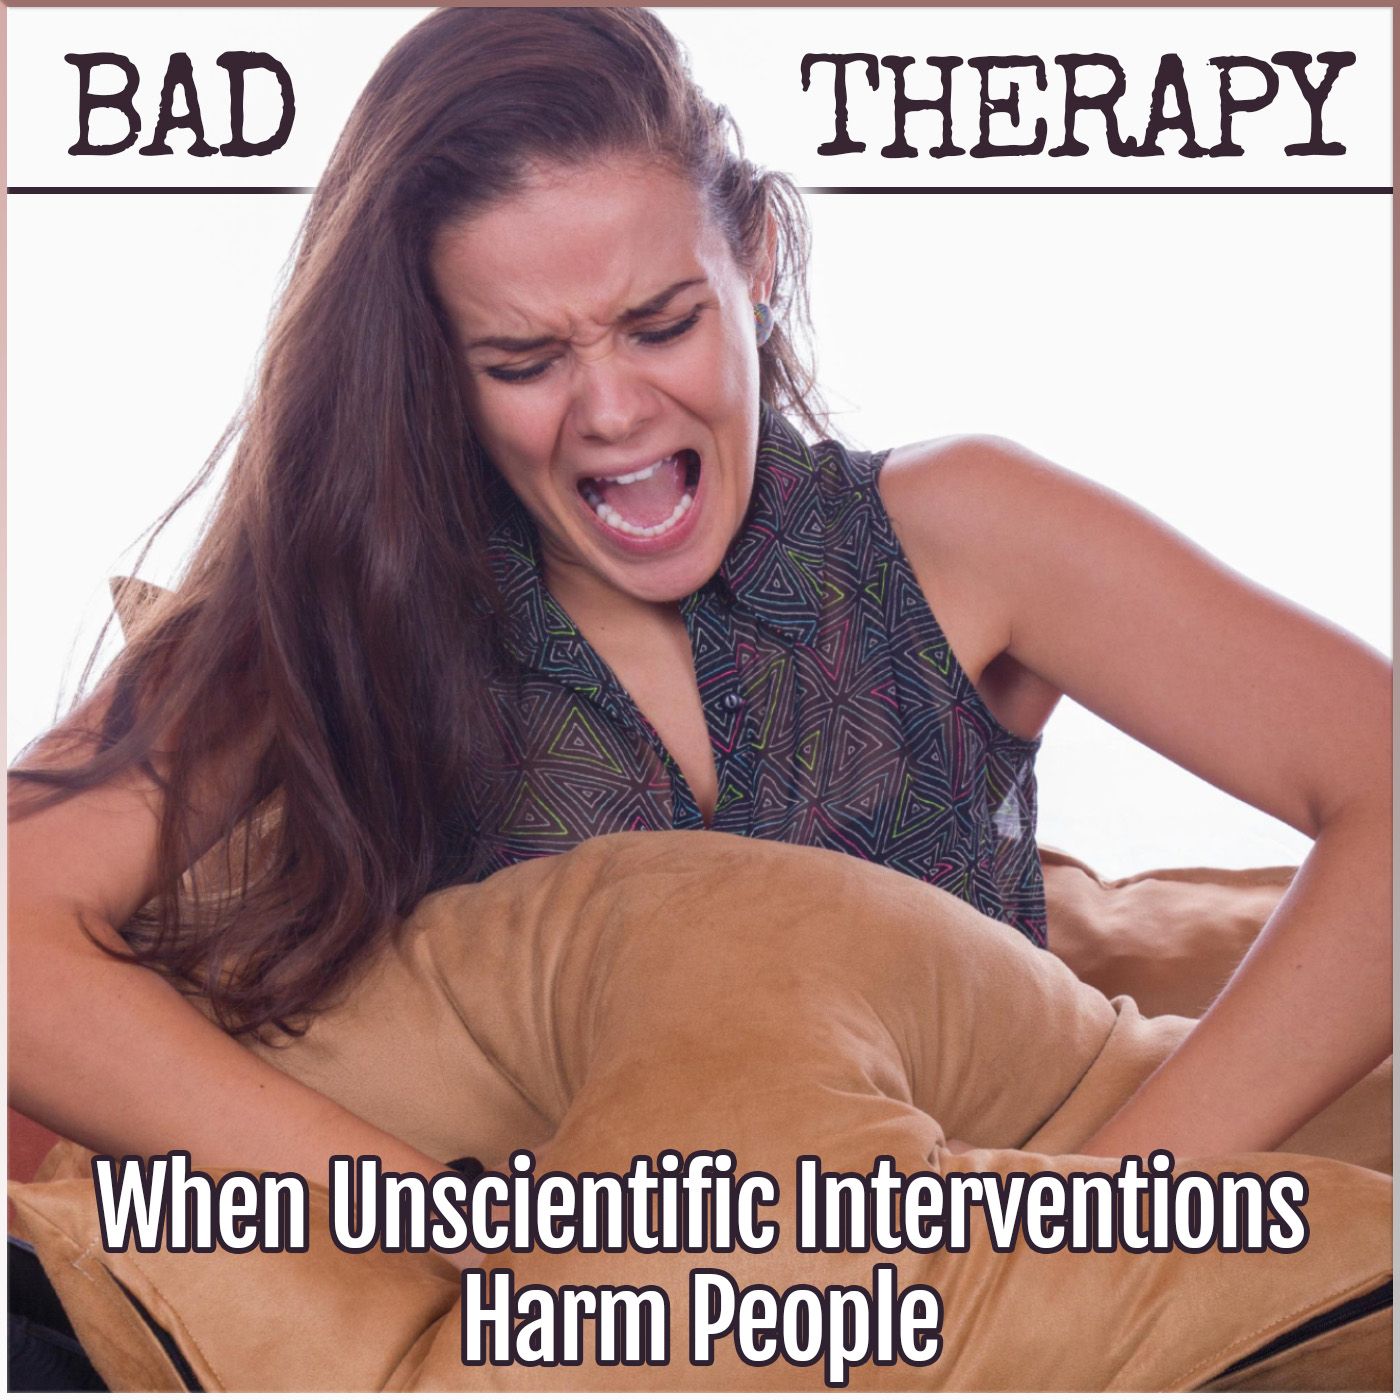 Bad Therapy: When Unscientific Interventions Harm People